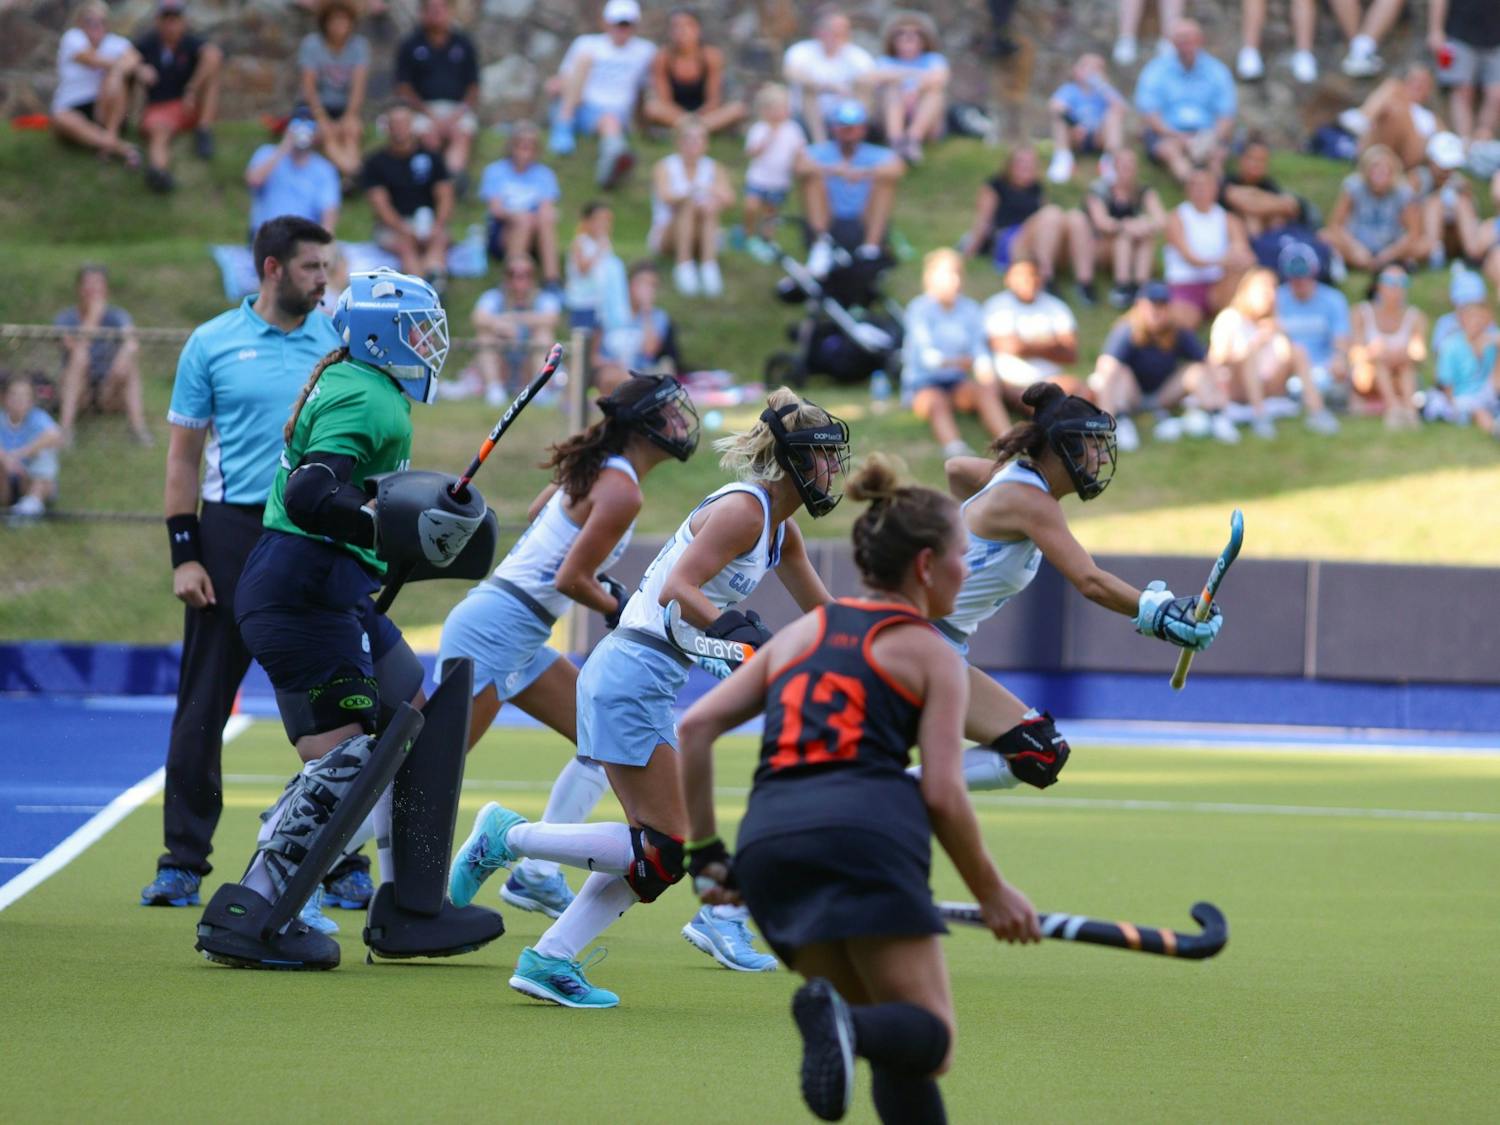 The UNC Field Hockey penalty defenders sprint towards Princeton offense as they go for a penalty corner shot. UNC beat Princeton 4-3 on Friday, Sept. 2, 2022.